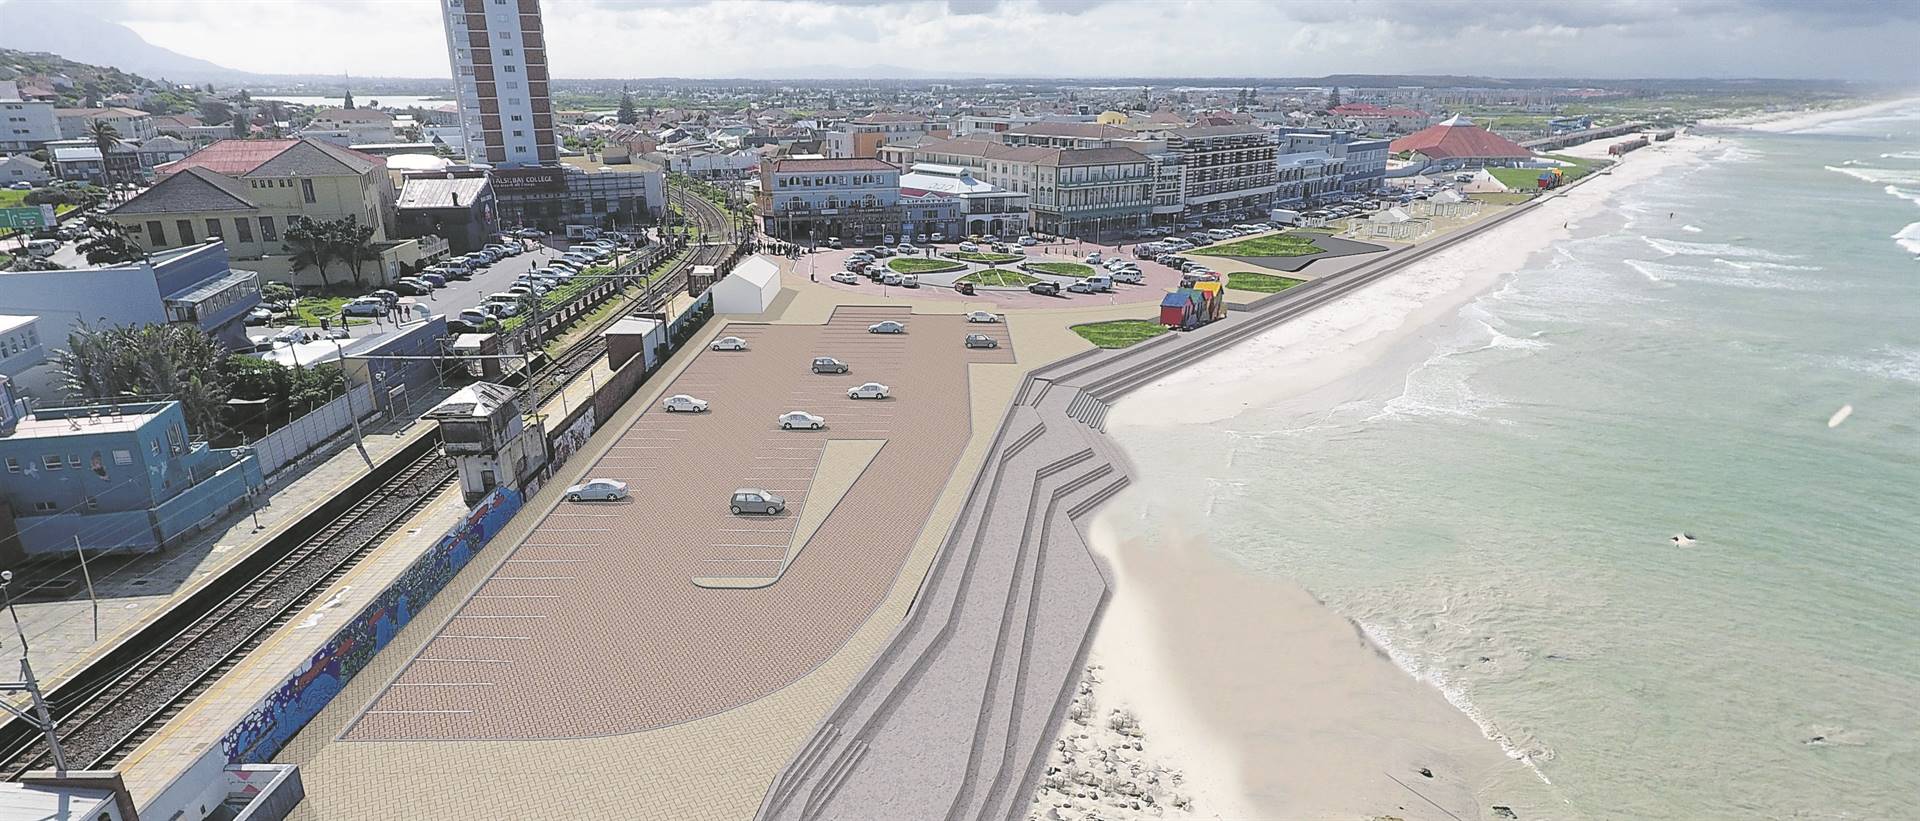 The proposed upgrade at Muizenberg beachfront incl